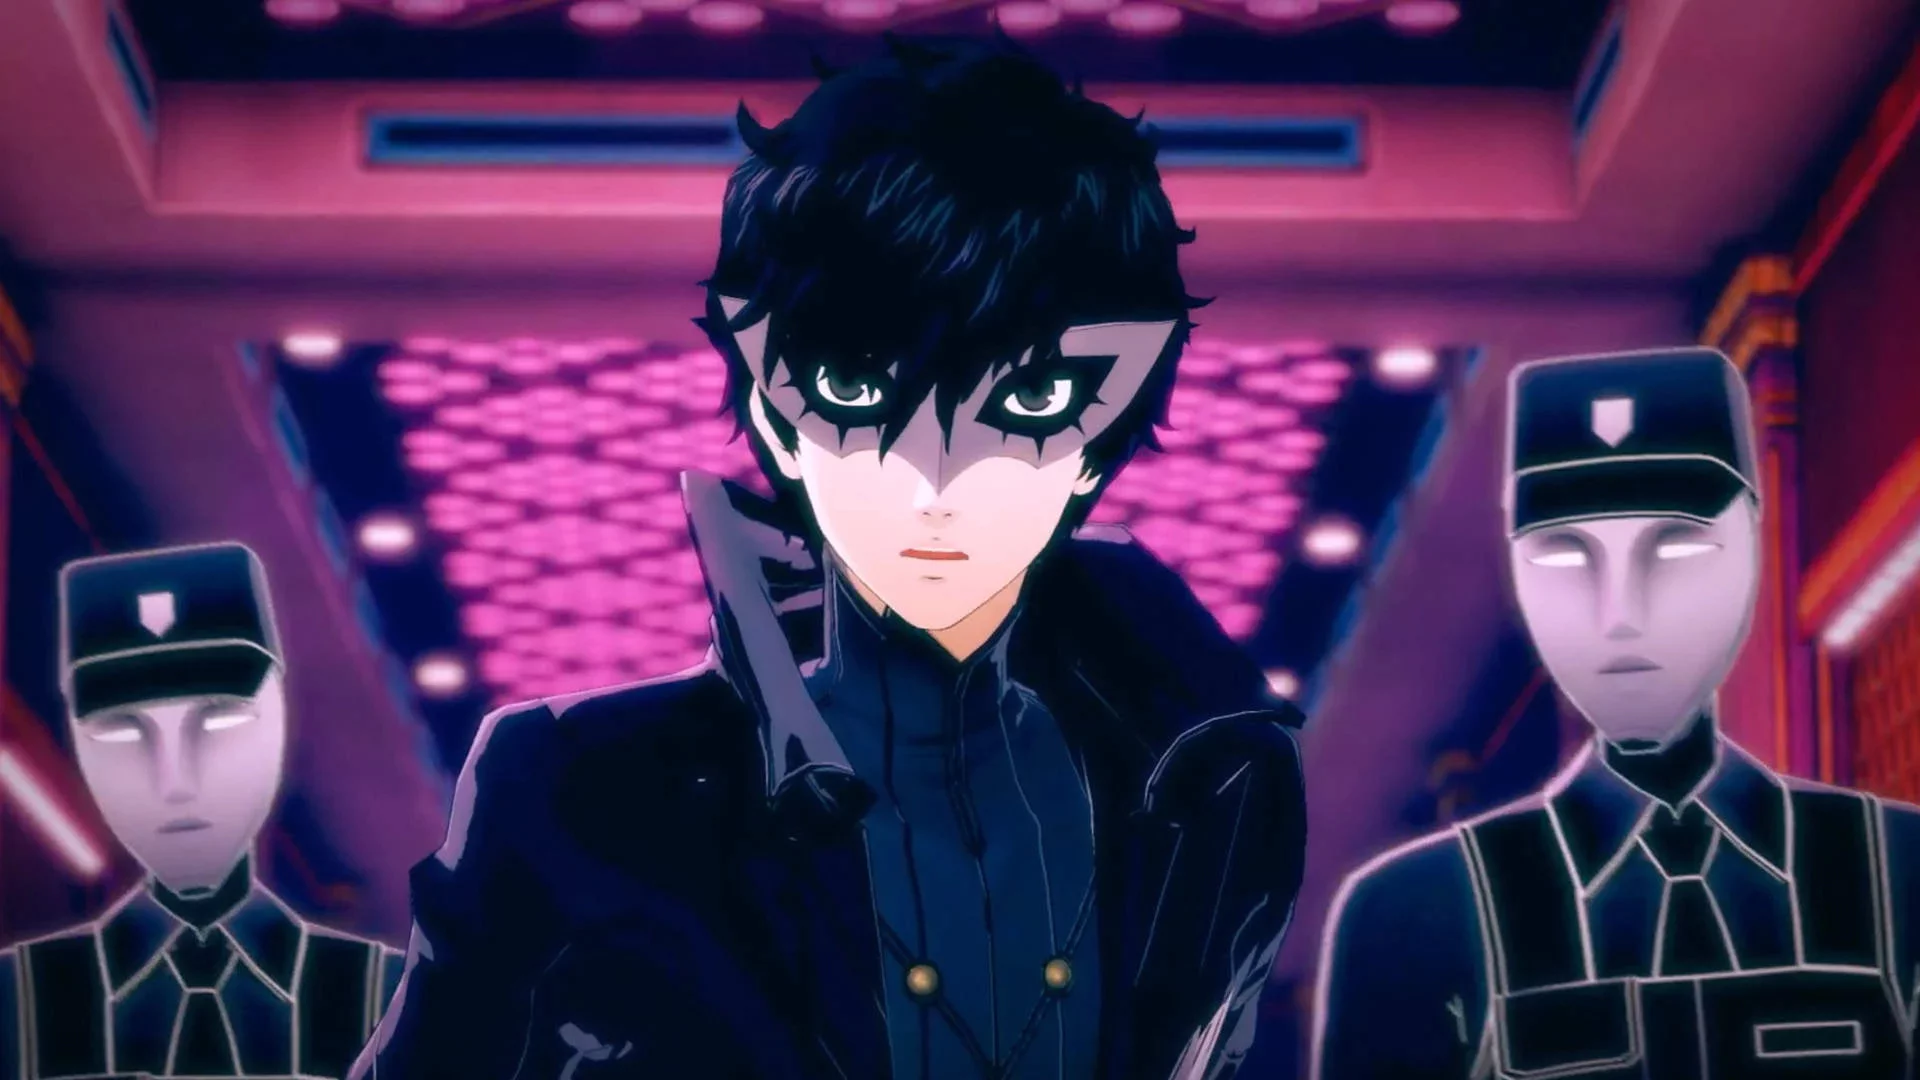 Persona 5 Scramble is off to a slow start compared to Persona 5 launch